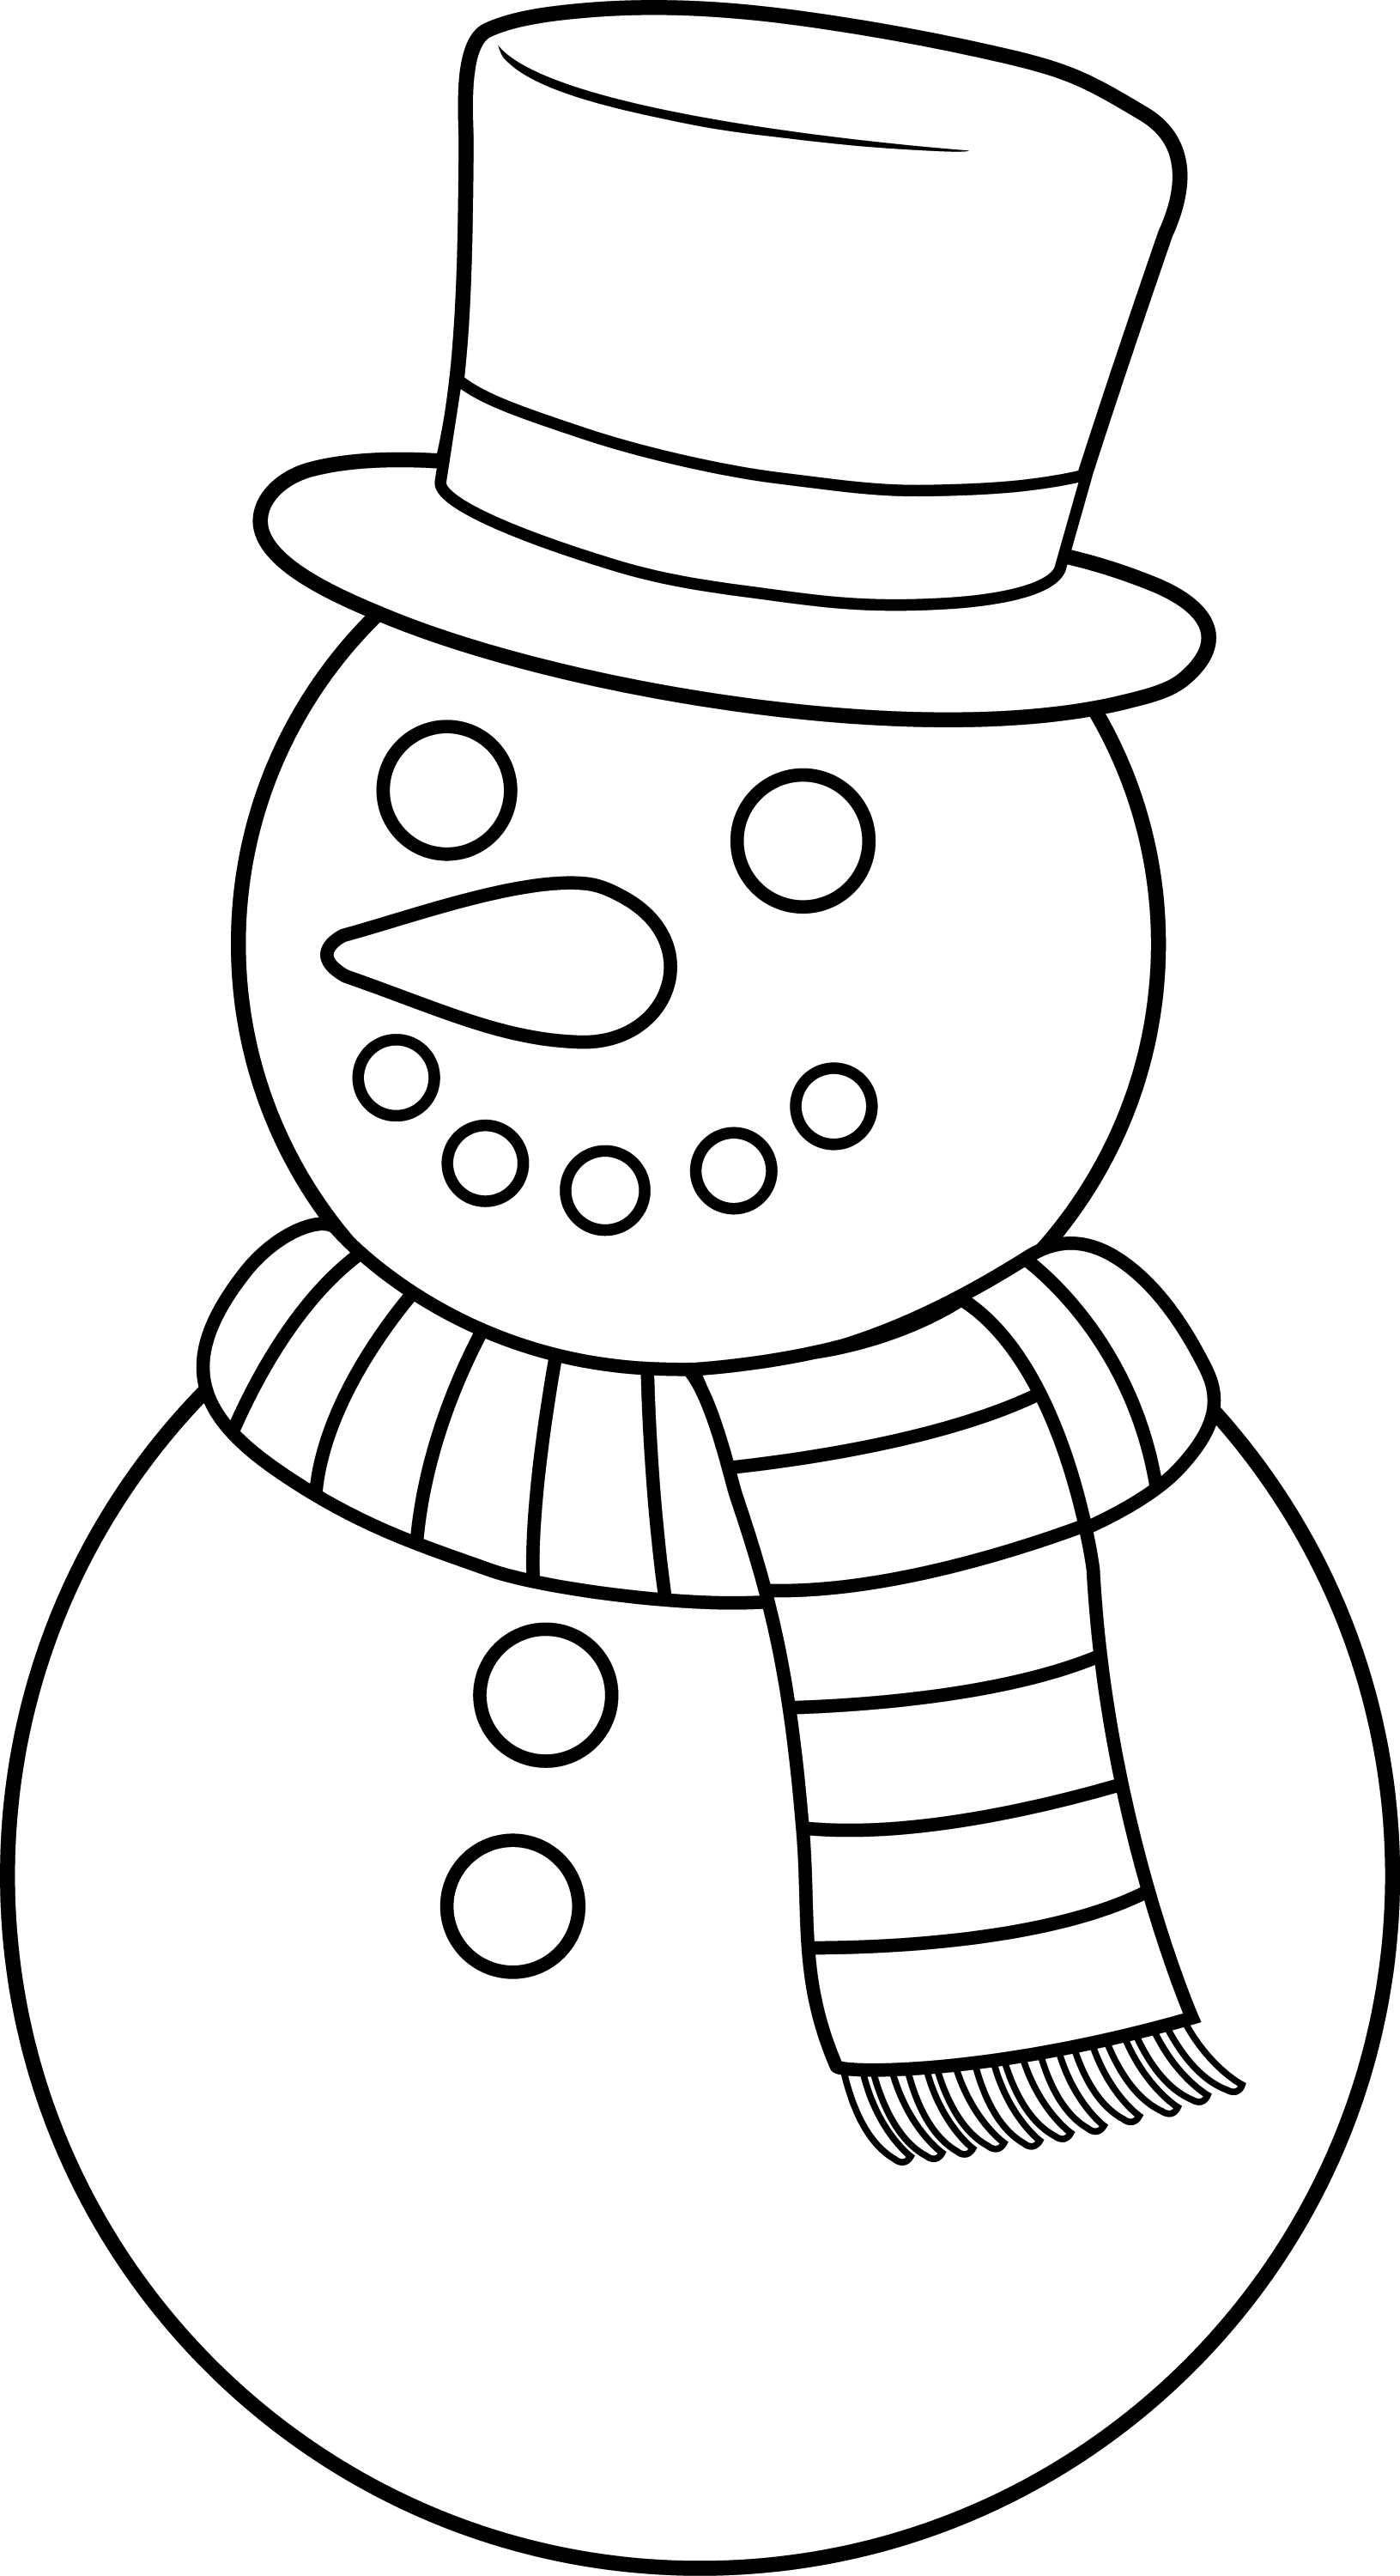 Free Printable Snowman Picture